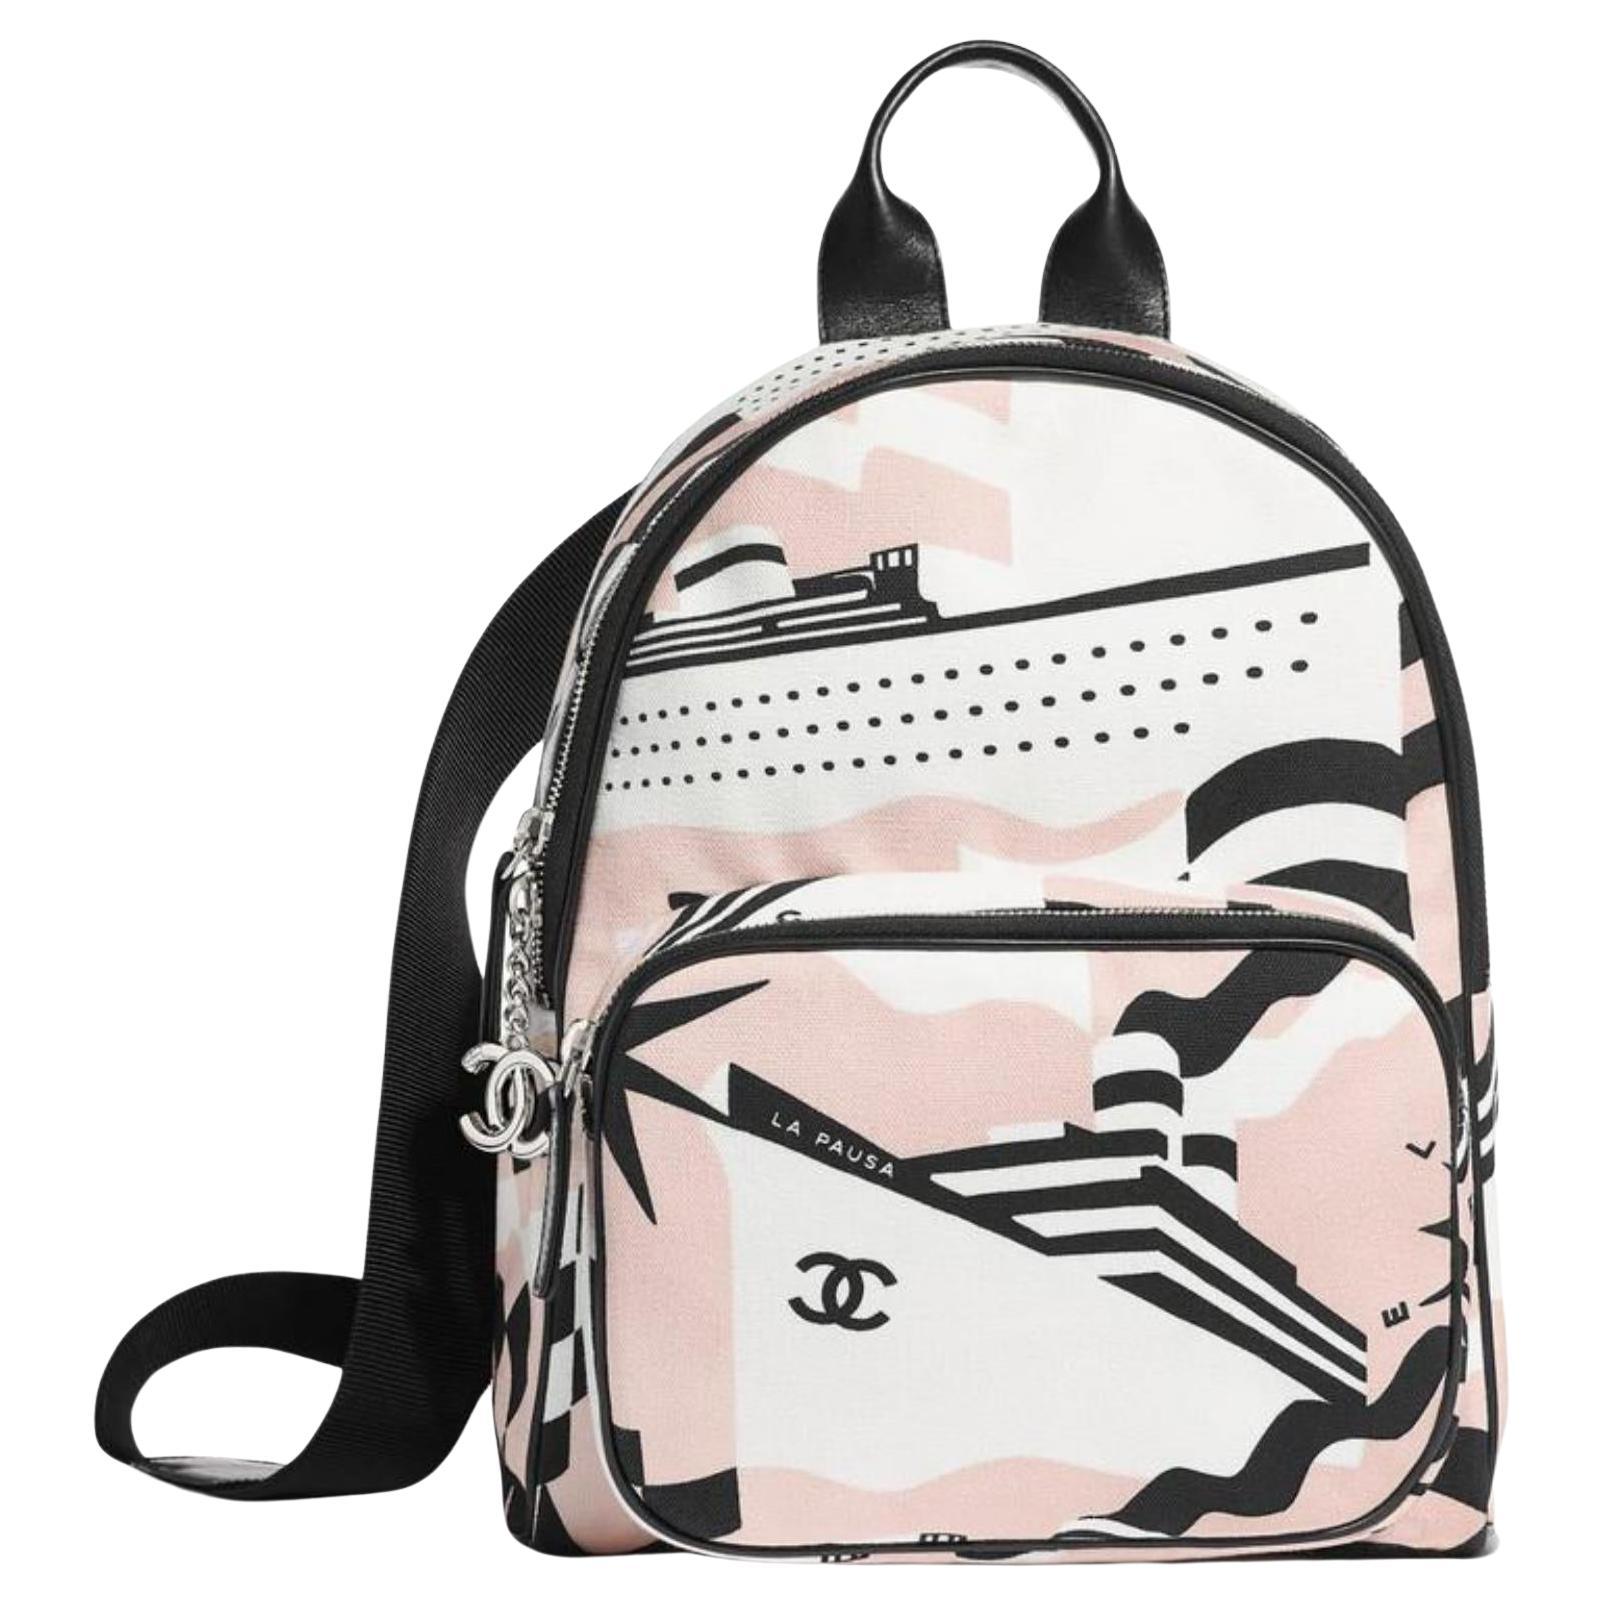 Chanel La Pausa Bay Printed Canvas Medium Backpack Limited Cruise s214ca74 For Sale